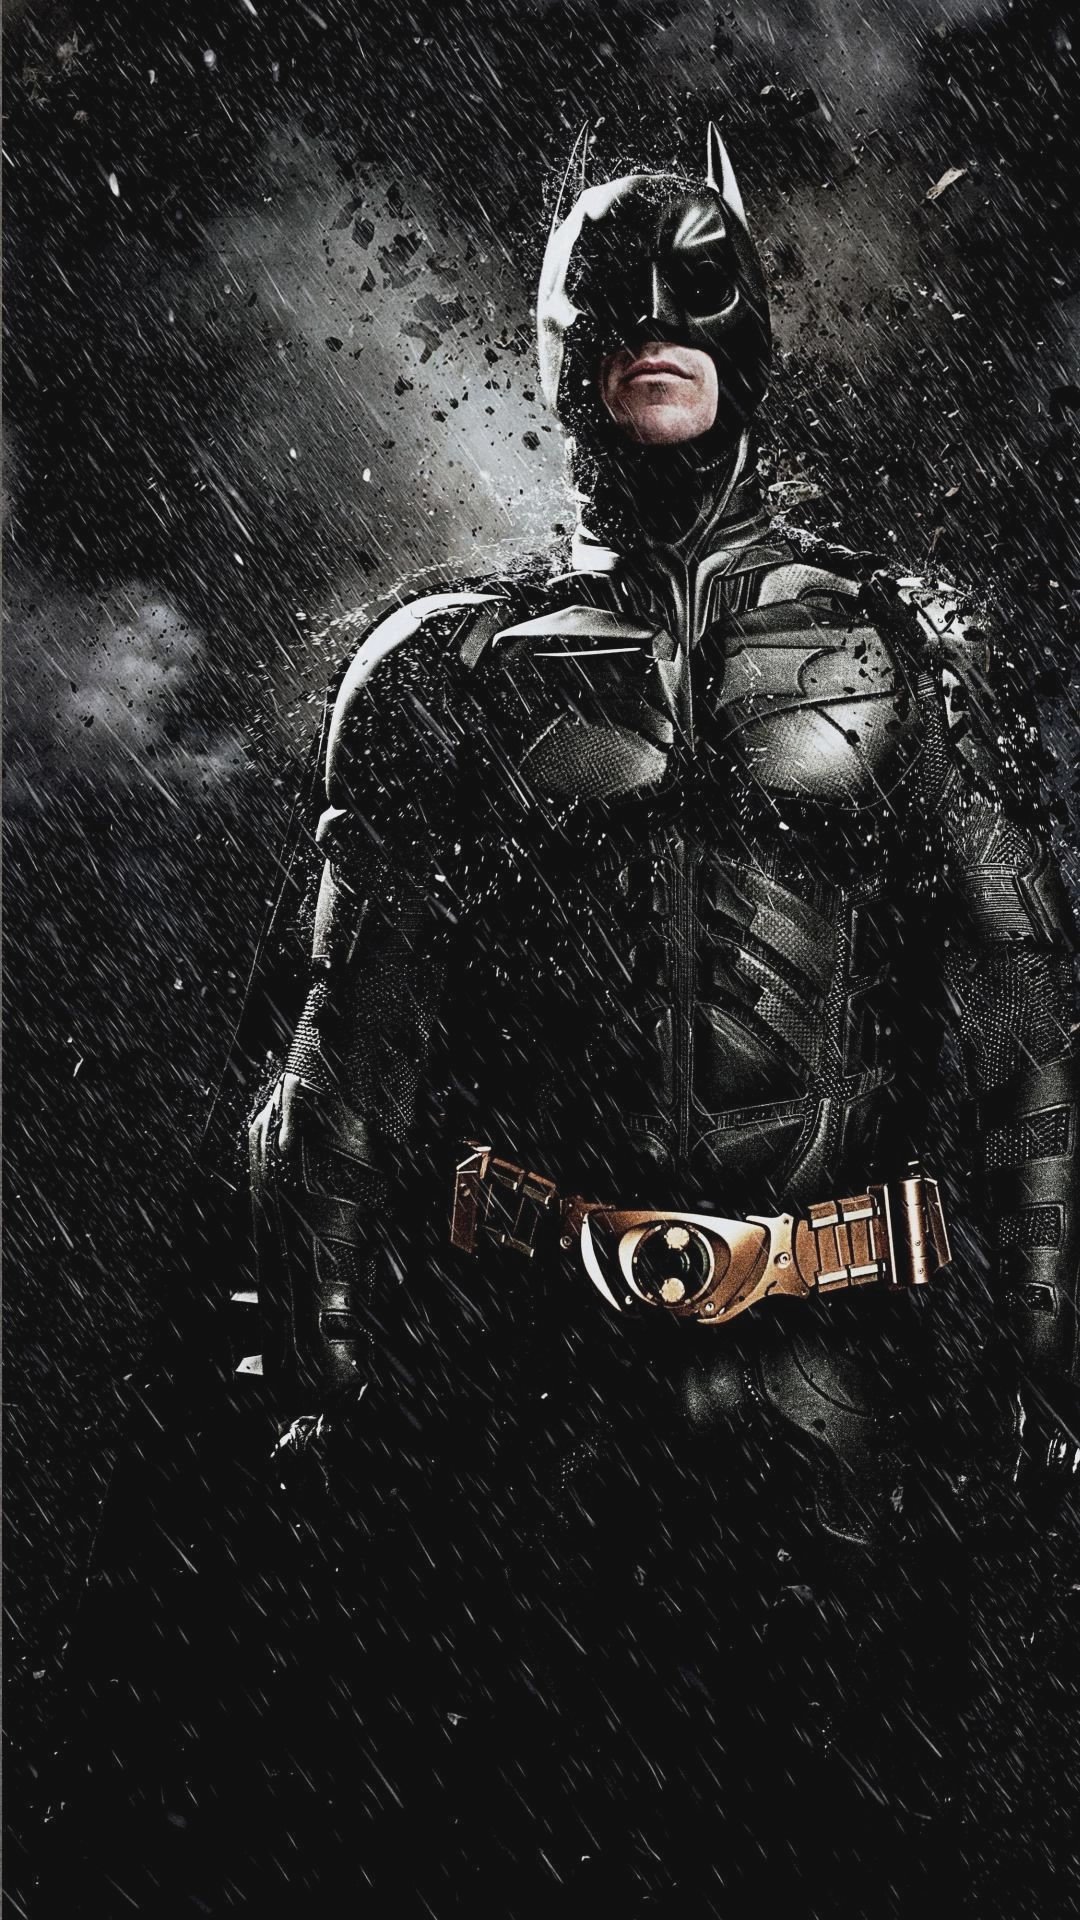 [gembloong Ads1] Wallpapers Hd 1080p Android Awesome - Dark Knight Wallpaper Android - HD Wallpaper 